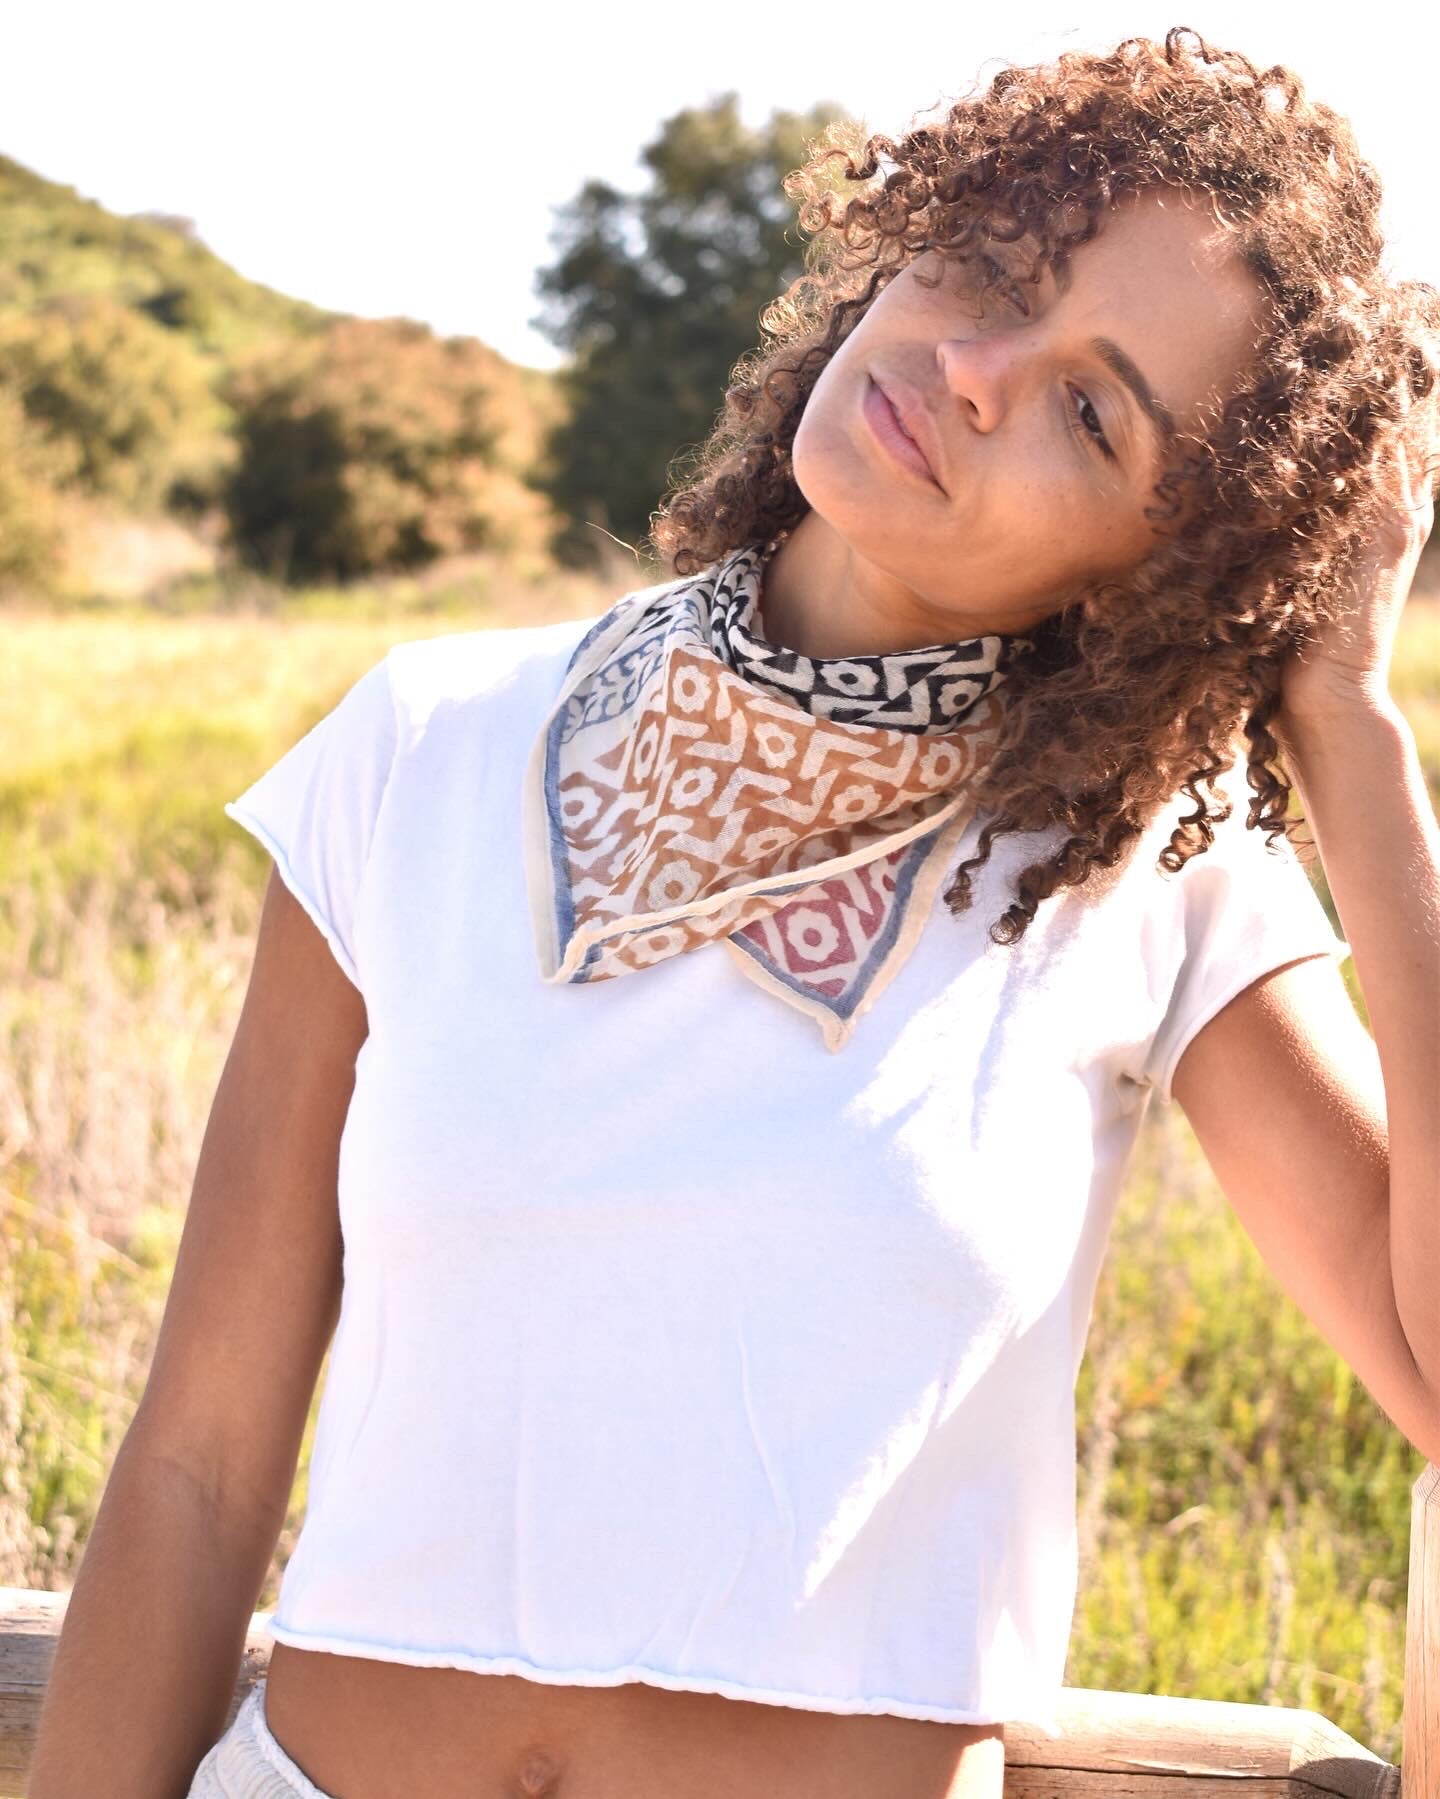 Woman in white tee wearing block printed Roma bandana around the neck, leaning against a wooden fence with trees in the background.